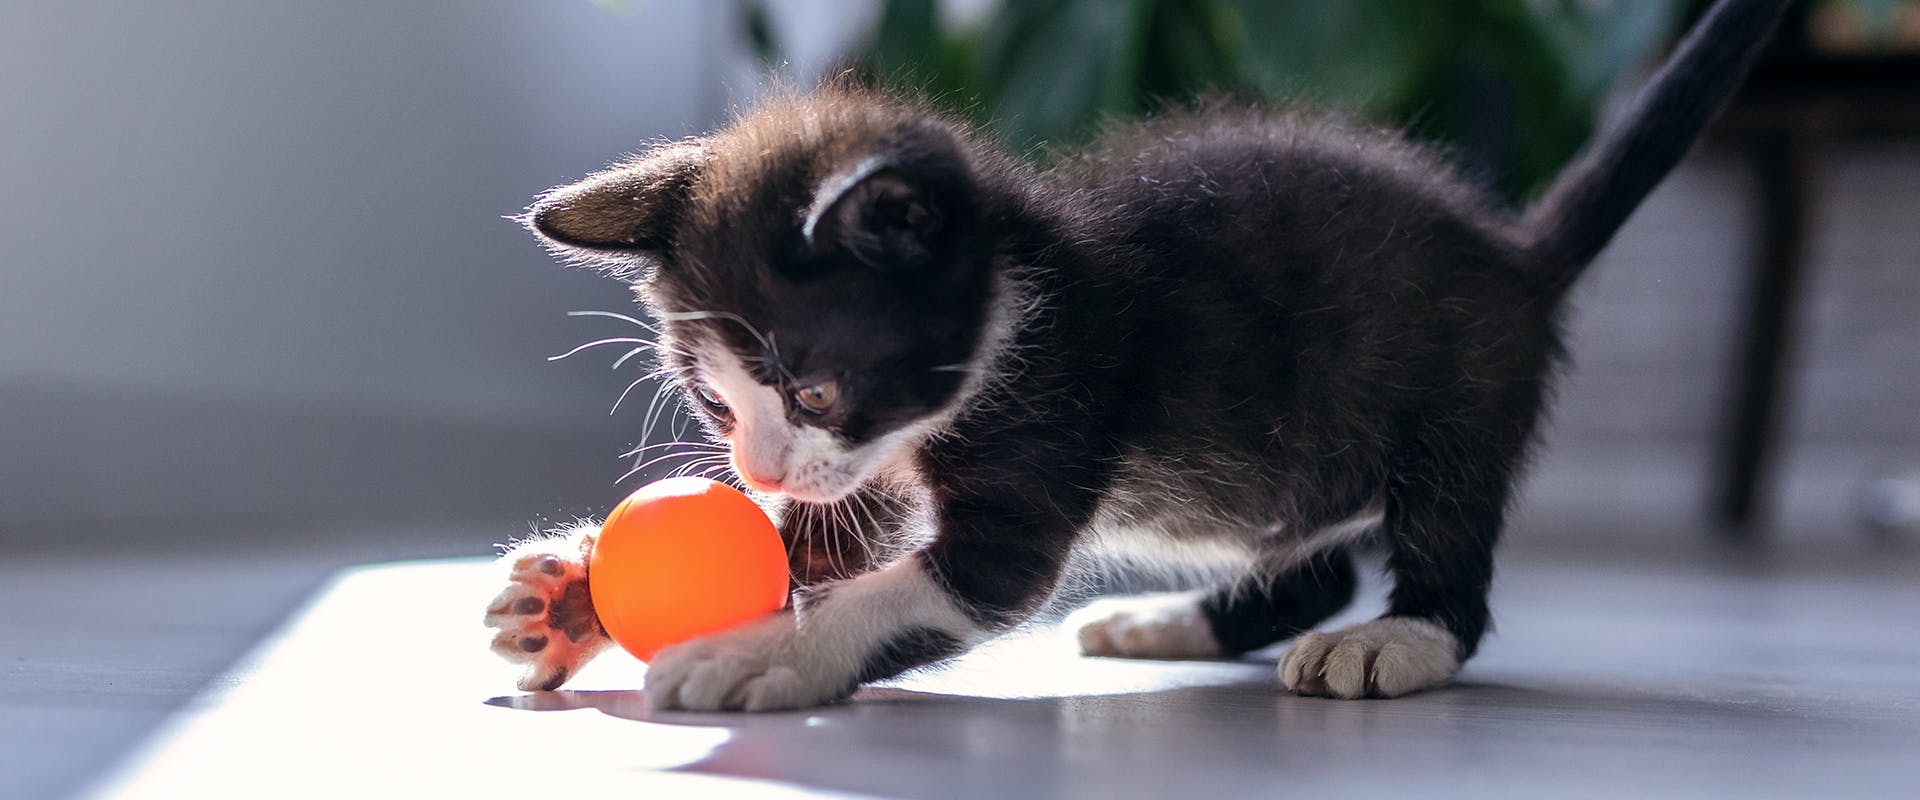 Popular cat names - a cute black and white kitten playing with an orange ball